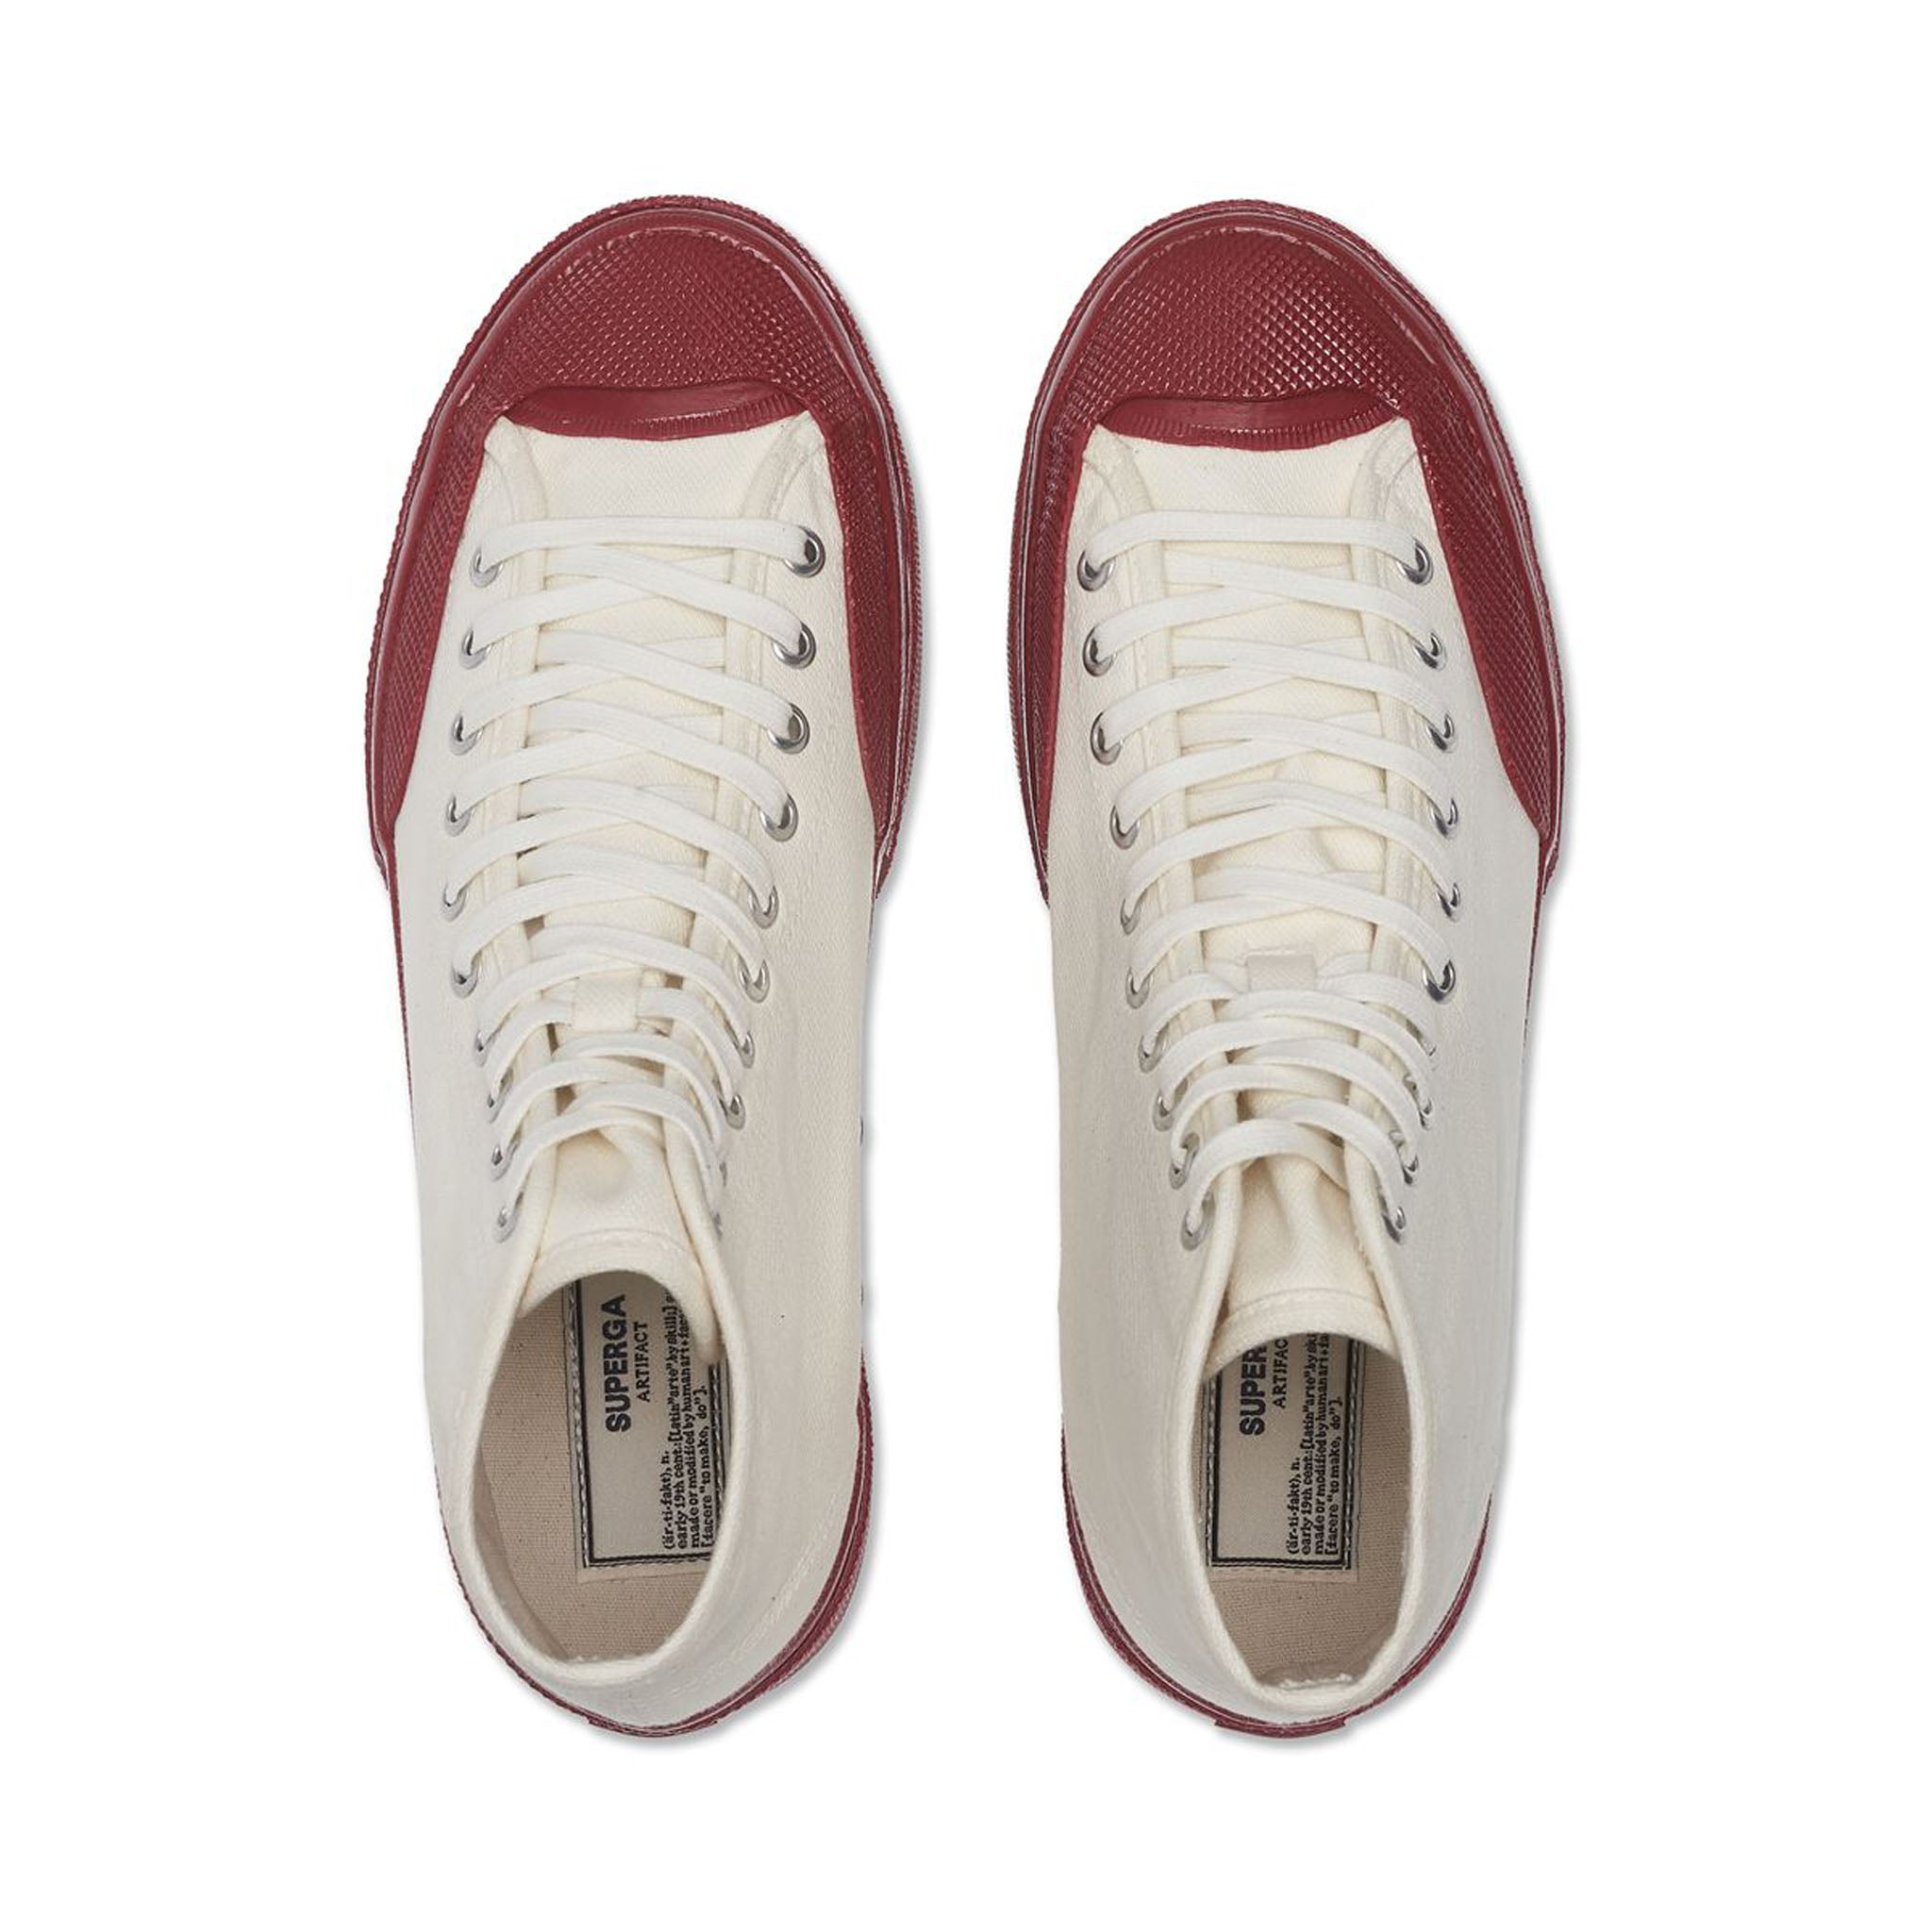 Superga 2433 Collect Workwear Sneakers - White / Red. Top view.